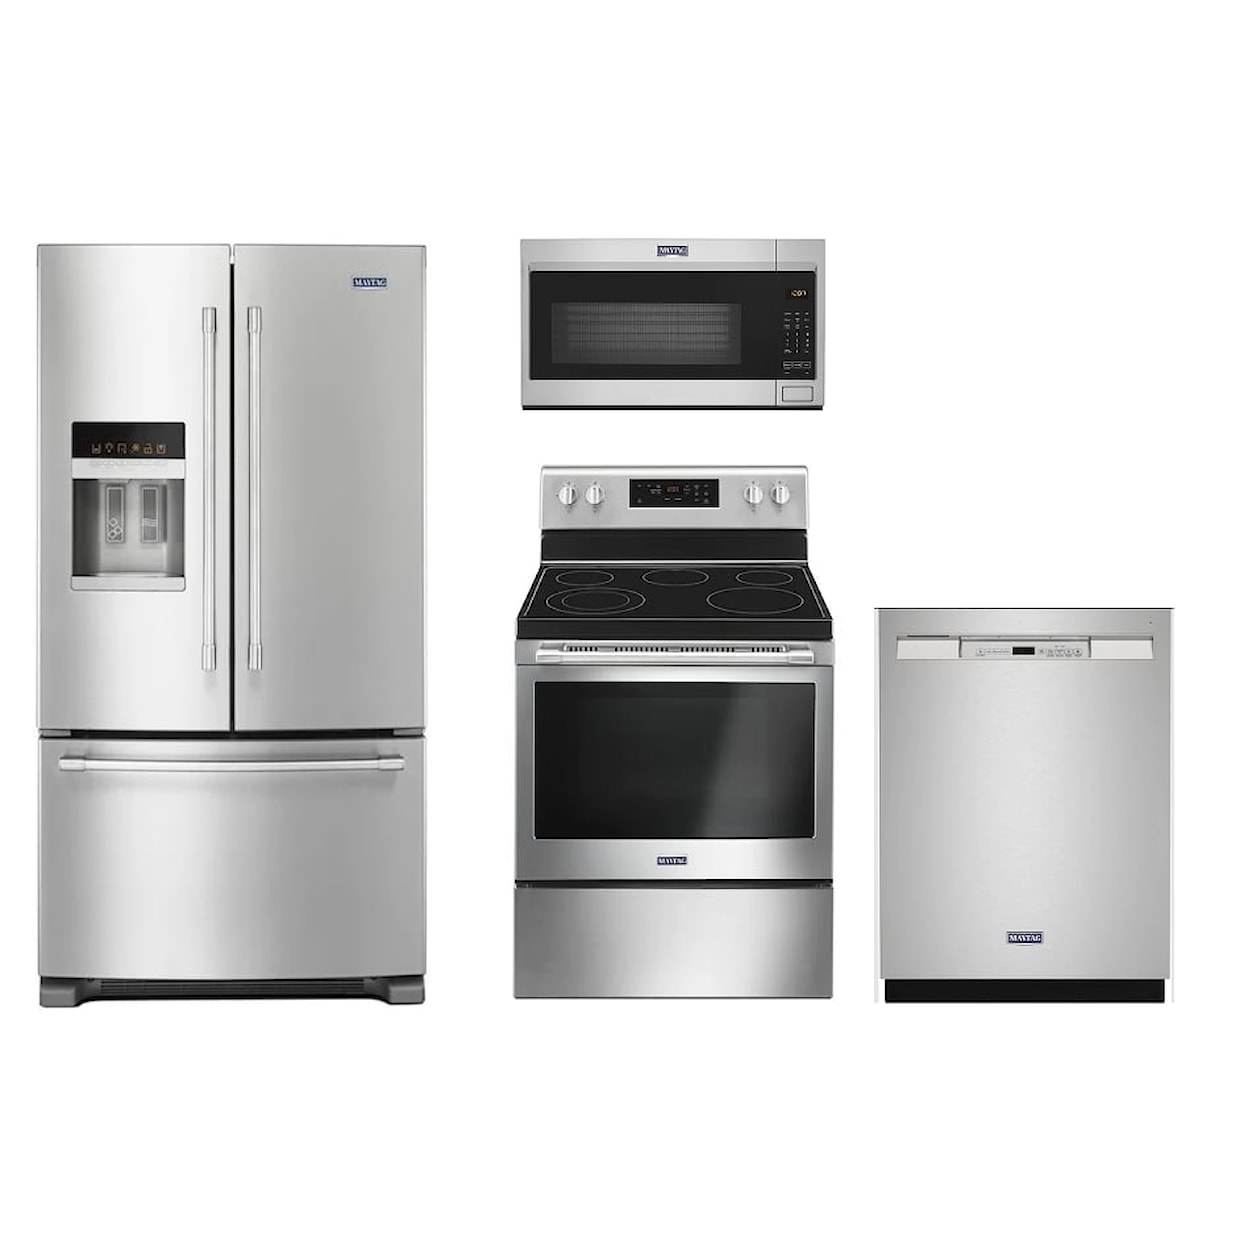 Maytag Maytag Maytag 4 pc Stainless Steel Appliance Set